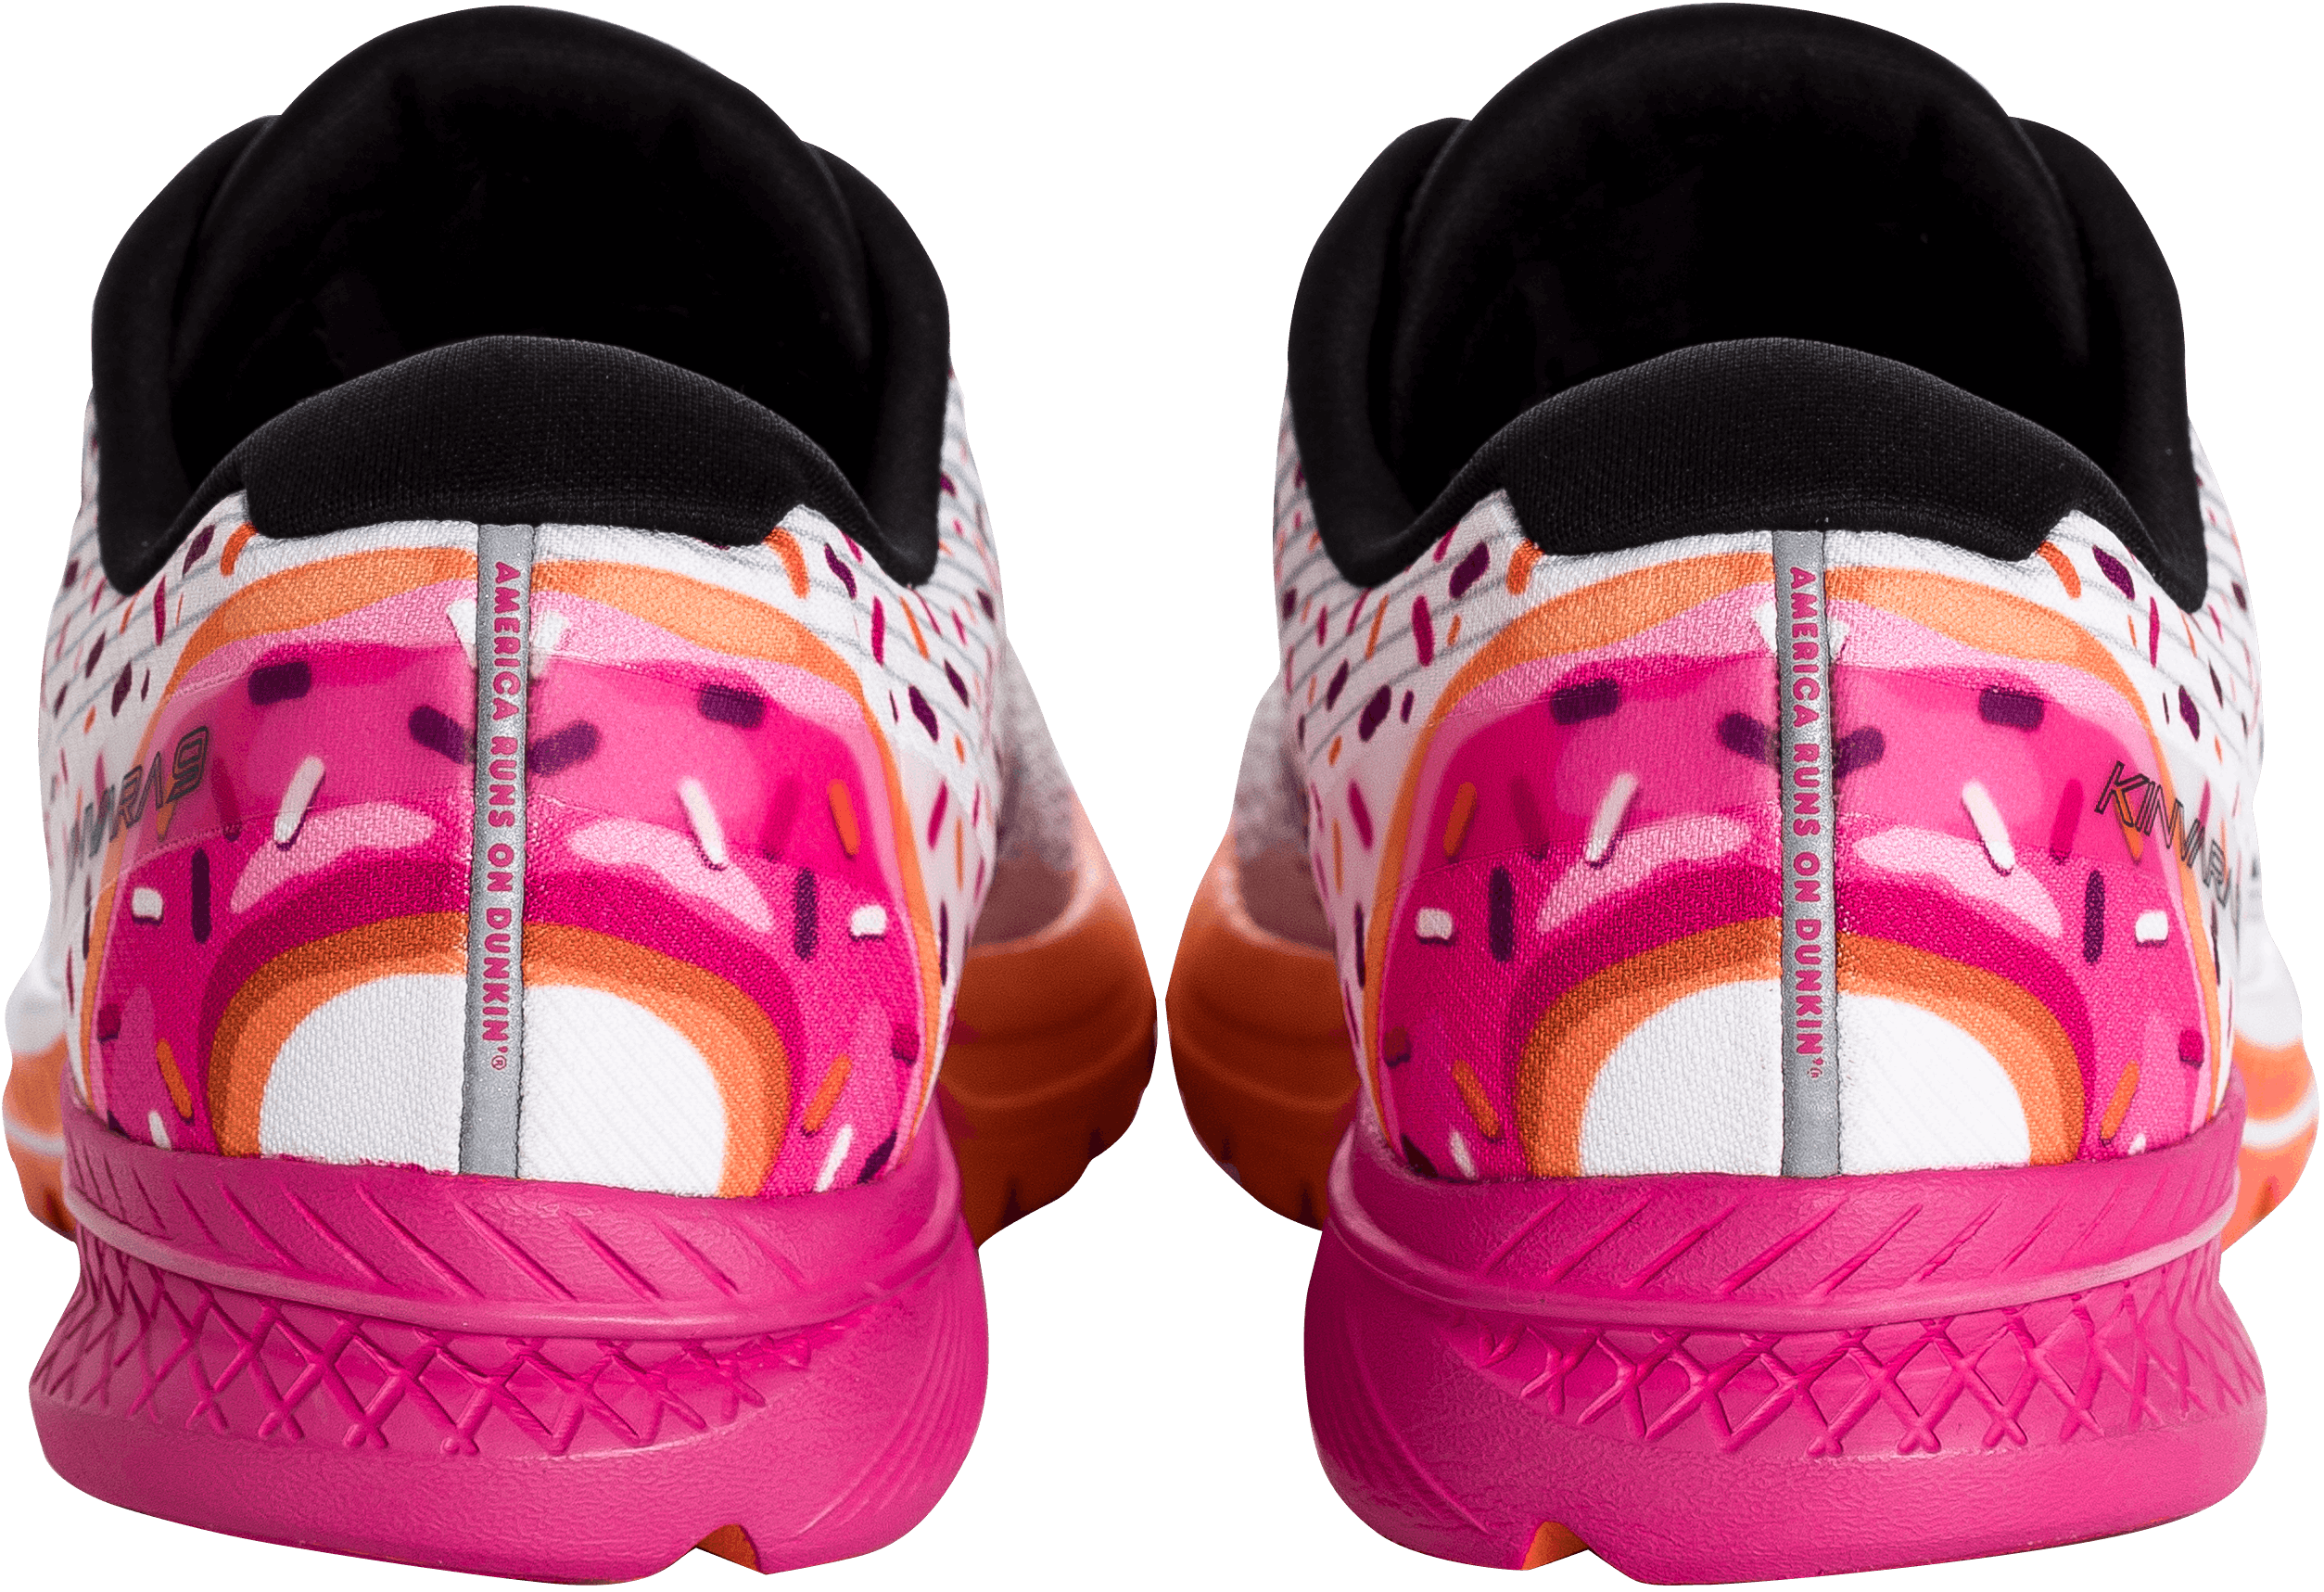 saucony shoes dunkin donuts